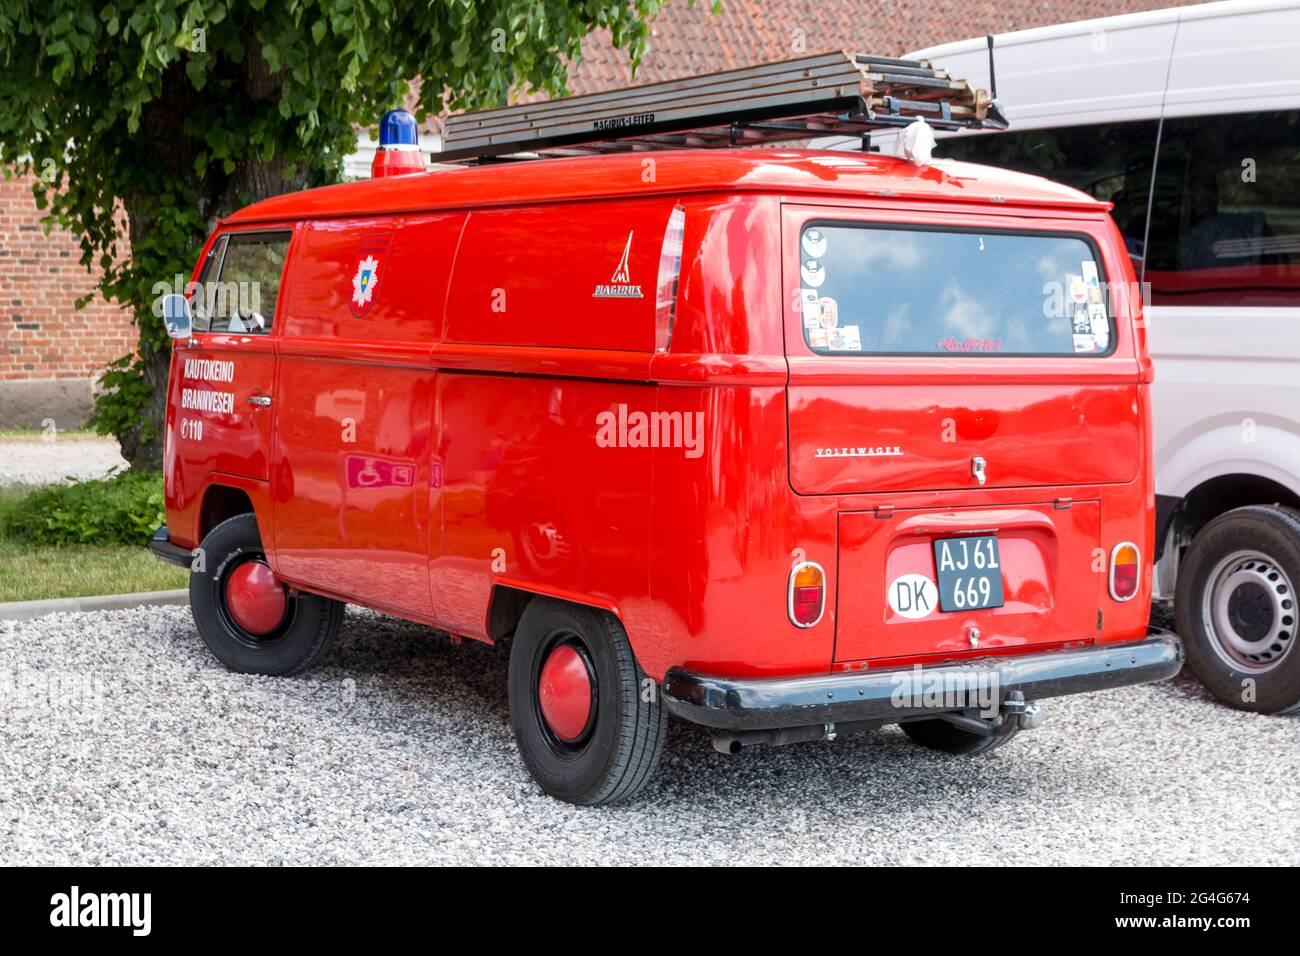 Auning, denmark - 19 June 2021: Old red vw bubble as fire truck, Stock Photo